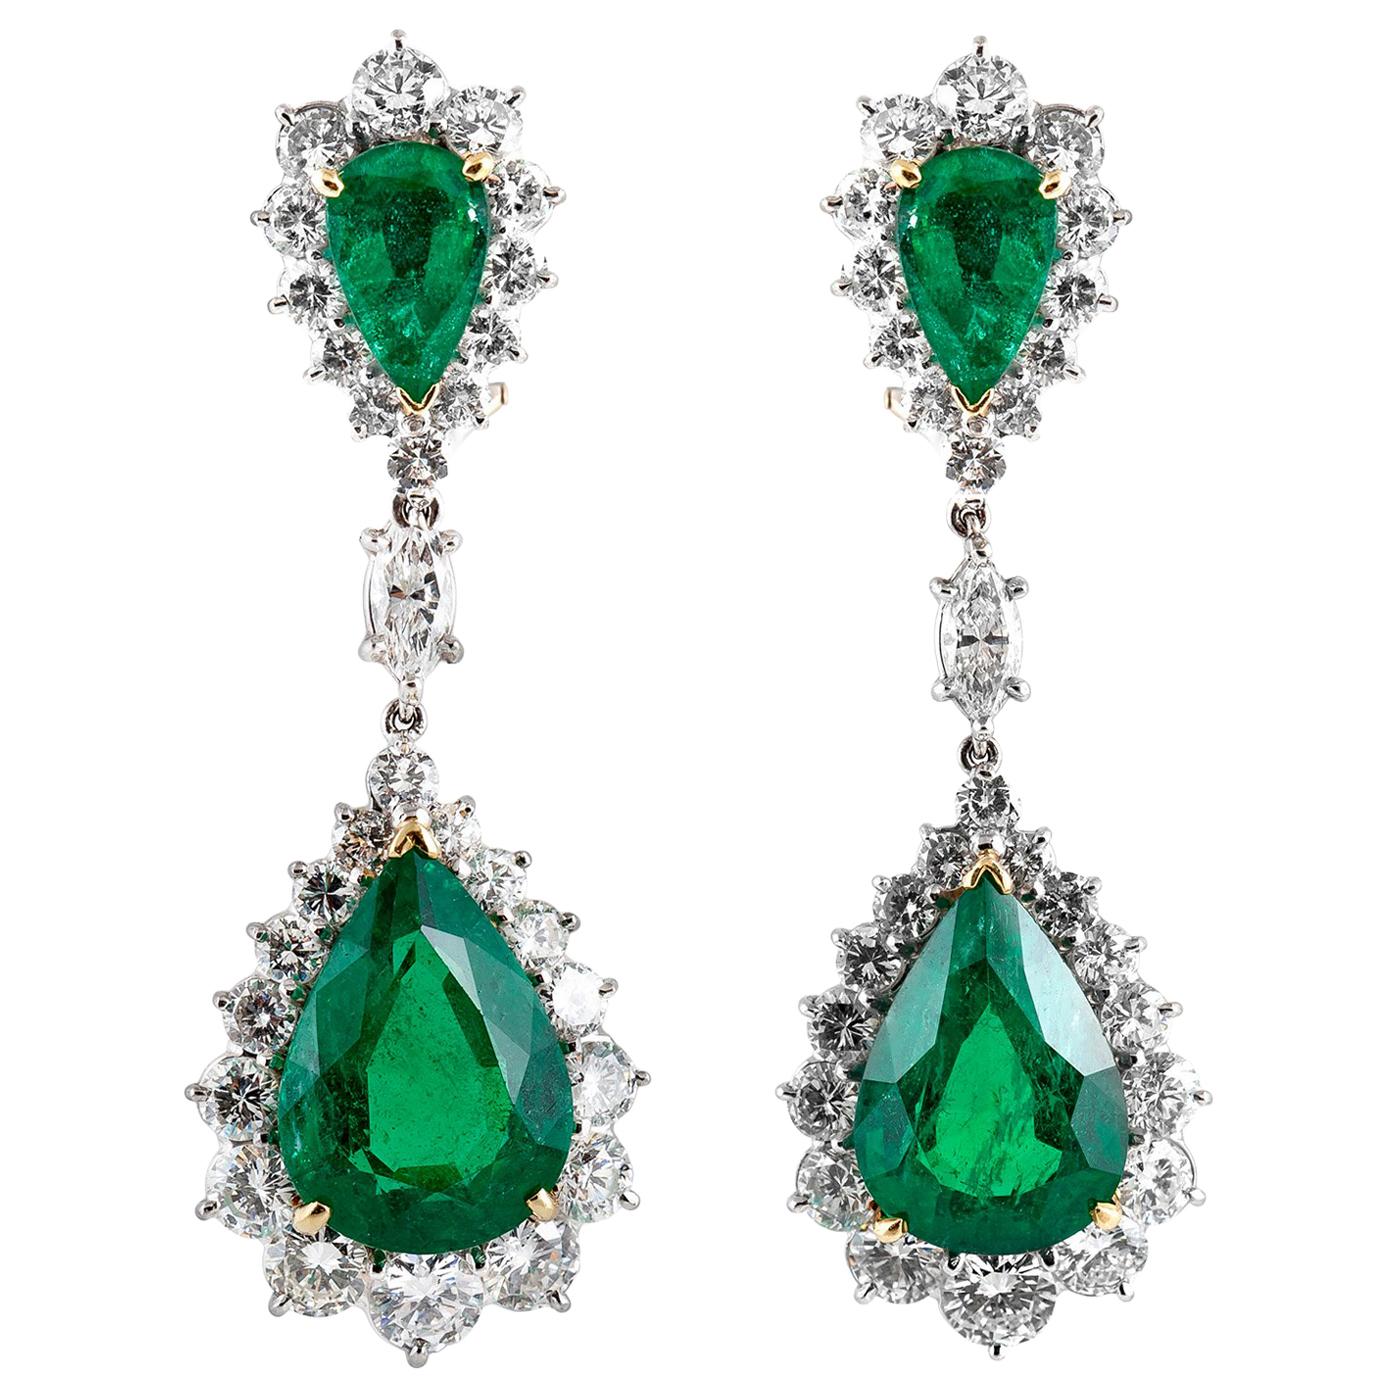 16.02 Carat Pear-Shaped Emerald Dangle Earrings with Diamonds For Sale